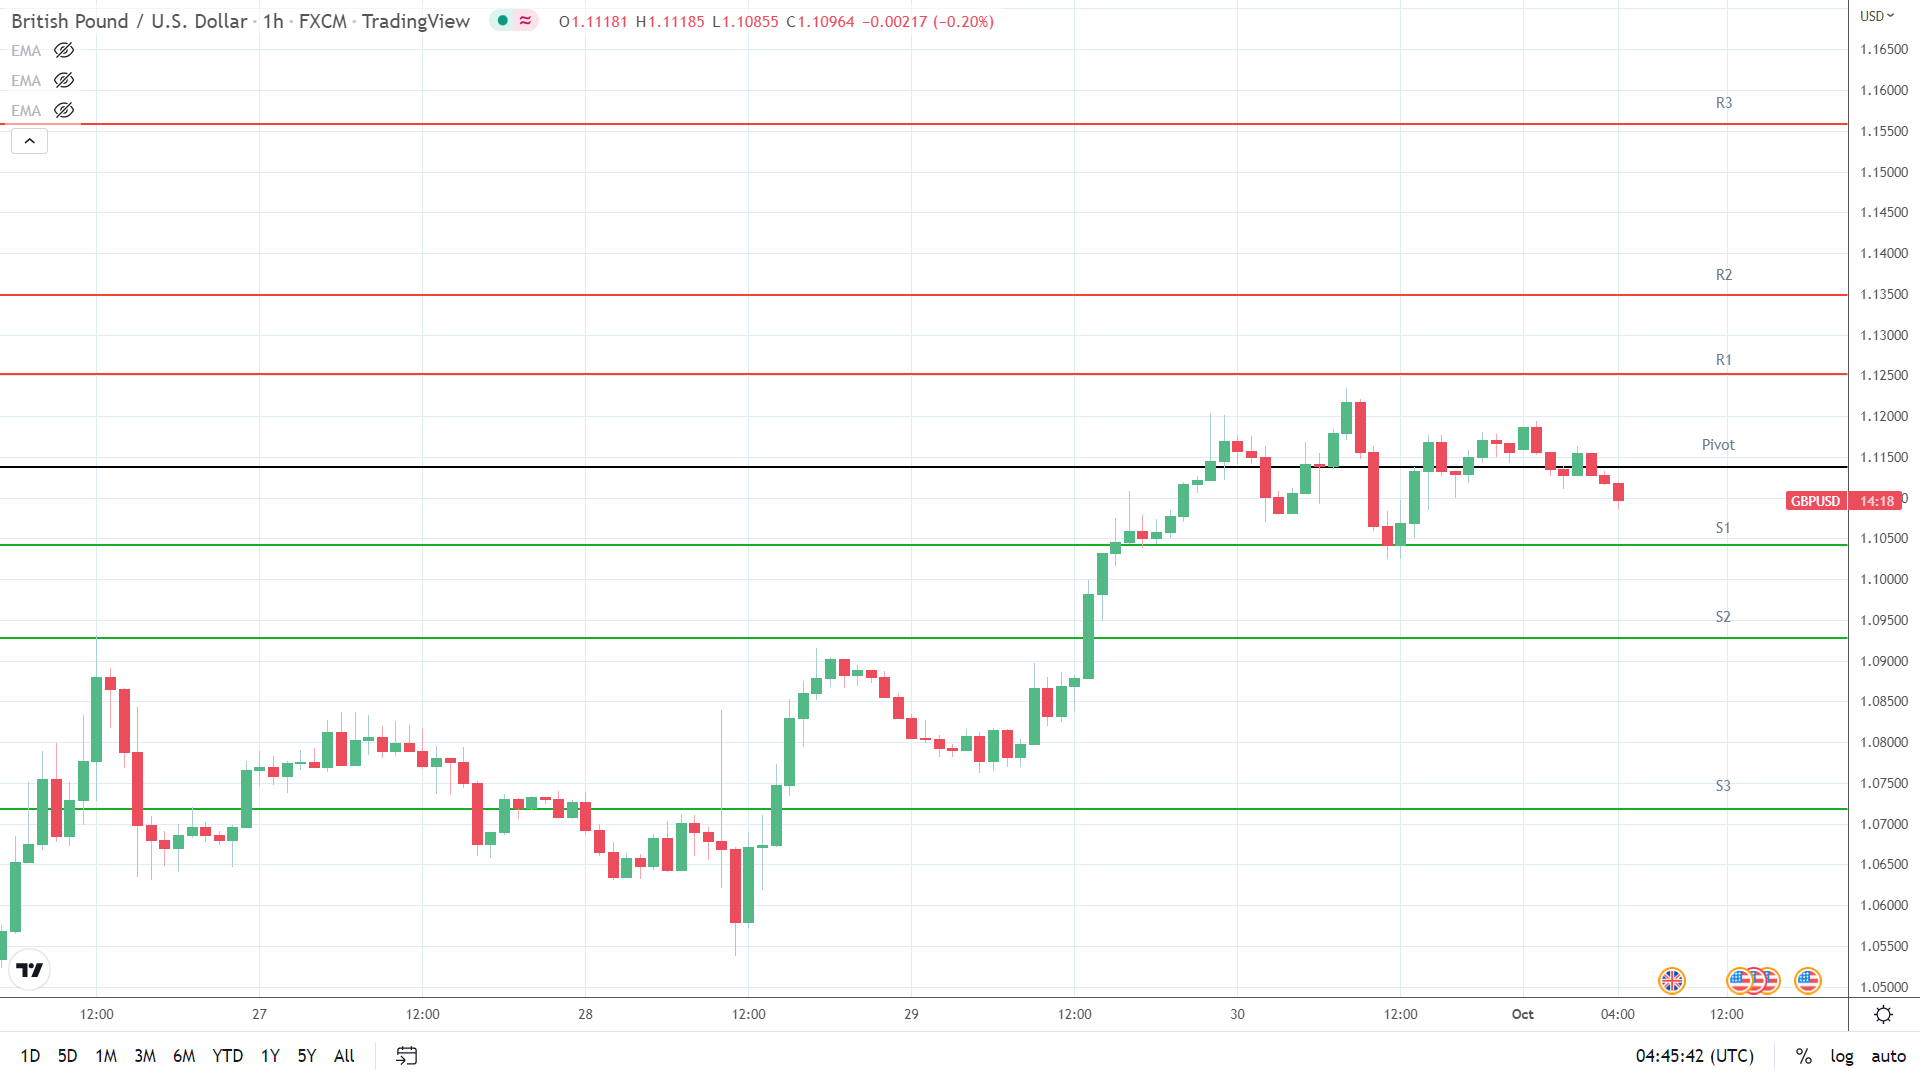 GBP/USD support levels in play below the pivot.